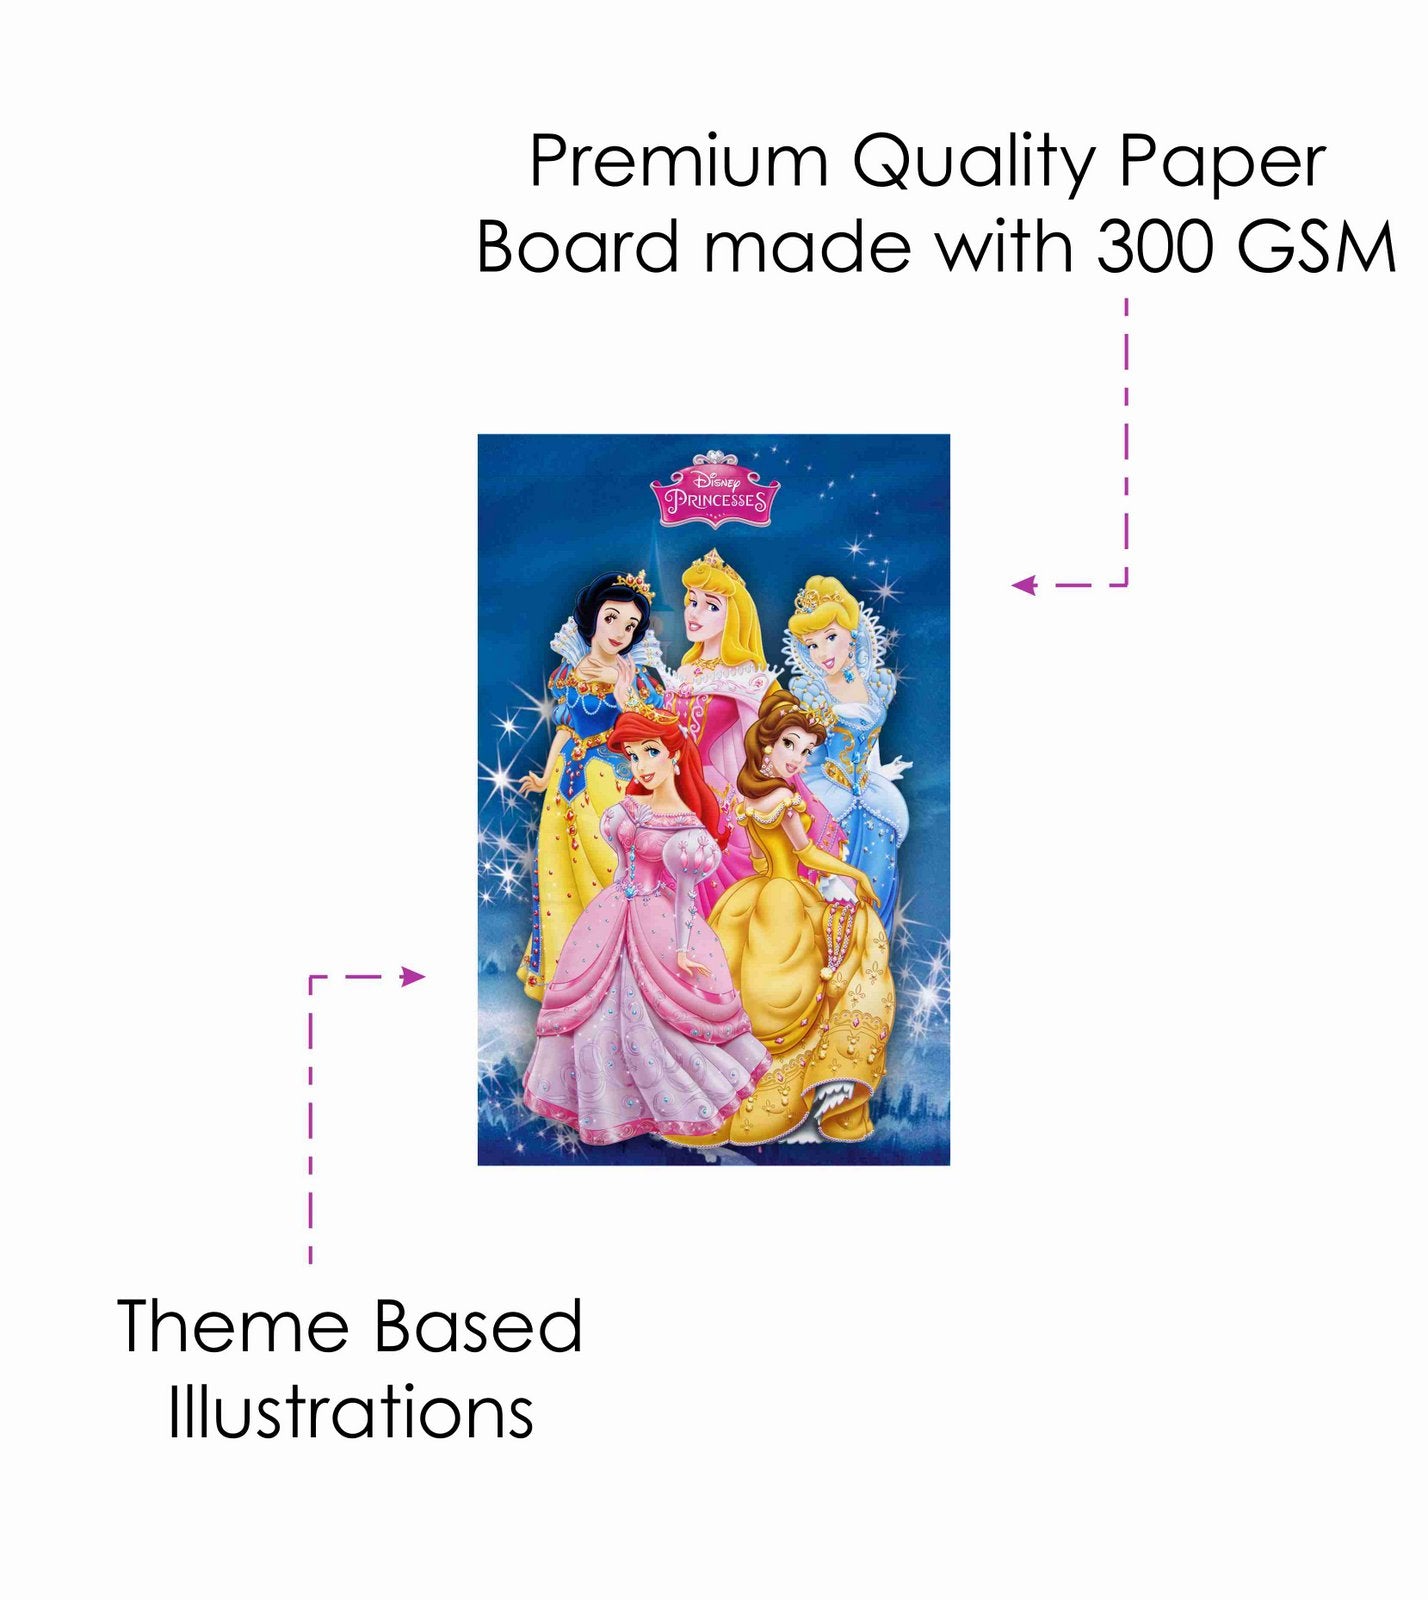 Castle Princess Theme Children's Birthday Party Invitations Cards with Envelopes - Kids Birthday Party Invitations for Boys or Girls,- Invitation Cards (Pack of 10)